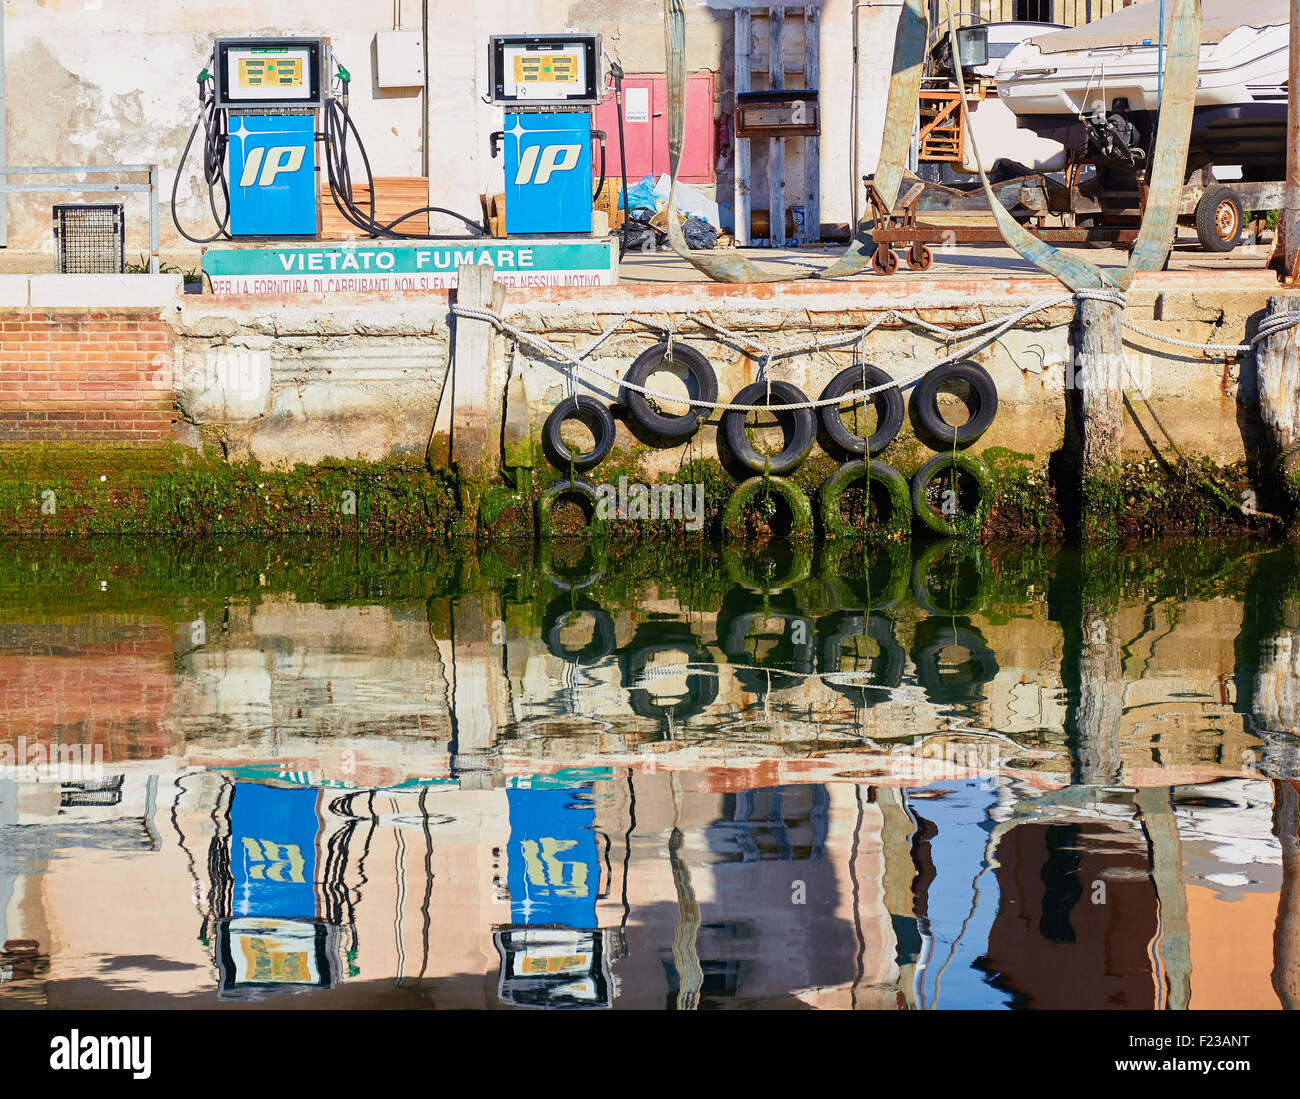 Canalside scene with fuel pumps and reflections Chioggia Venetian Lagoon Veneto Italy Europe Stock Photo